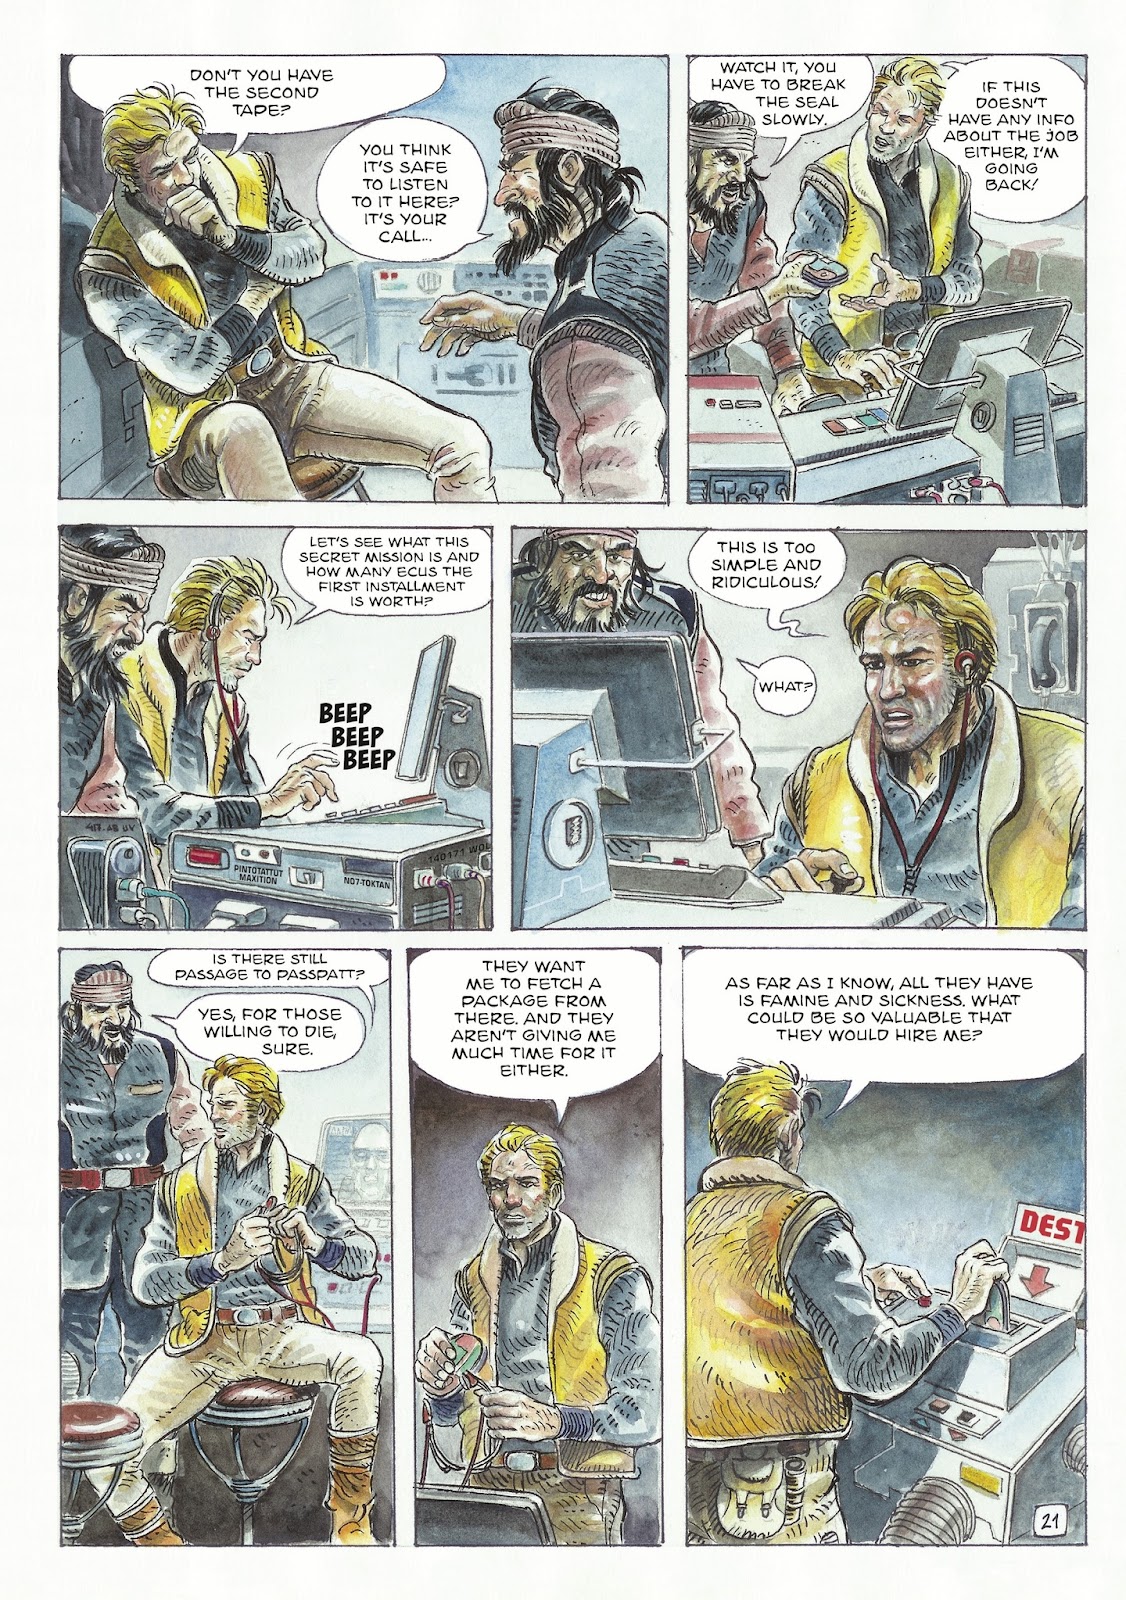 The Man With the Bear issue 1 - Page 23